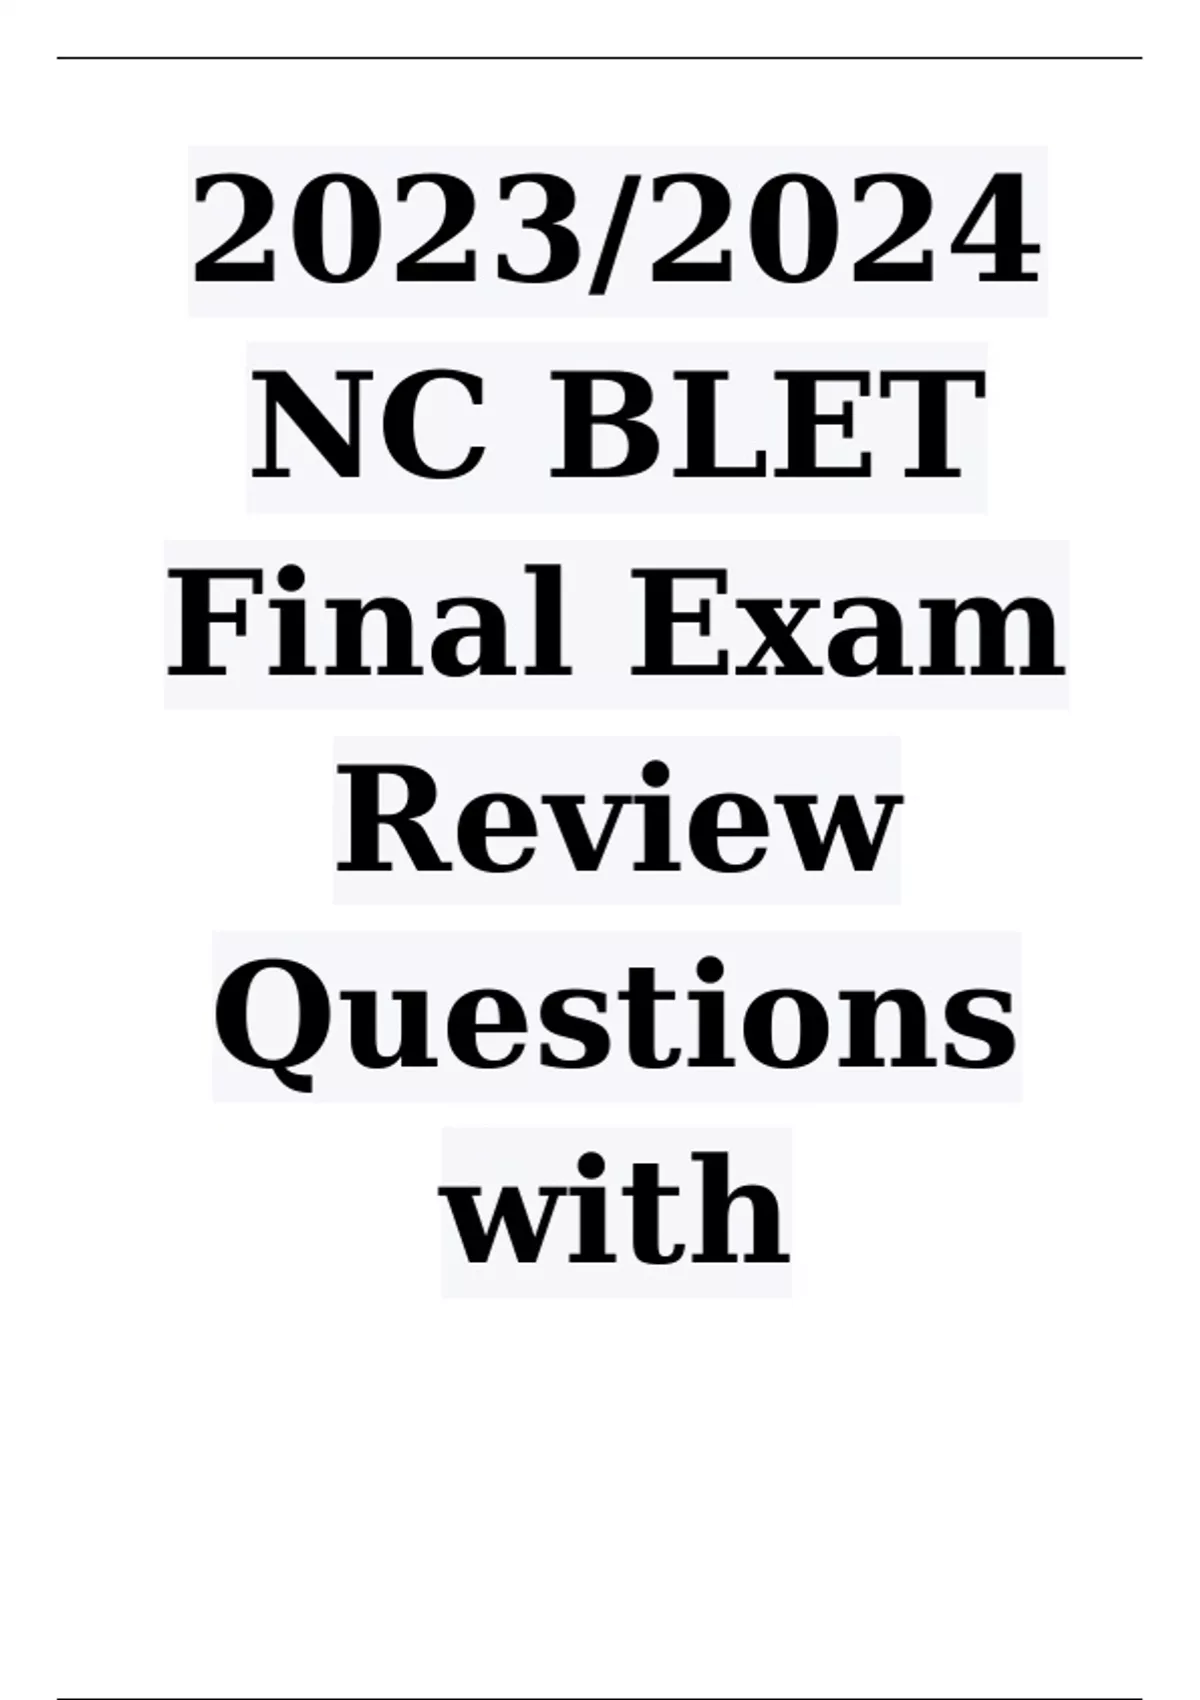 2023/2024 NC BLET Final Exam Review Questions with correct Answers Nc